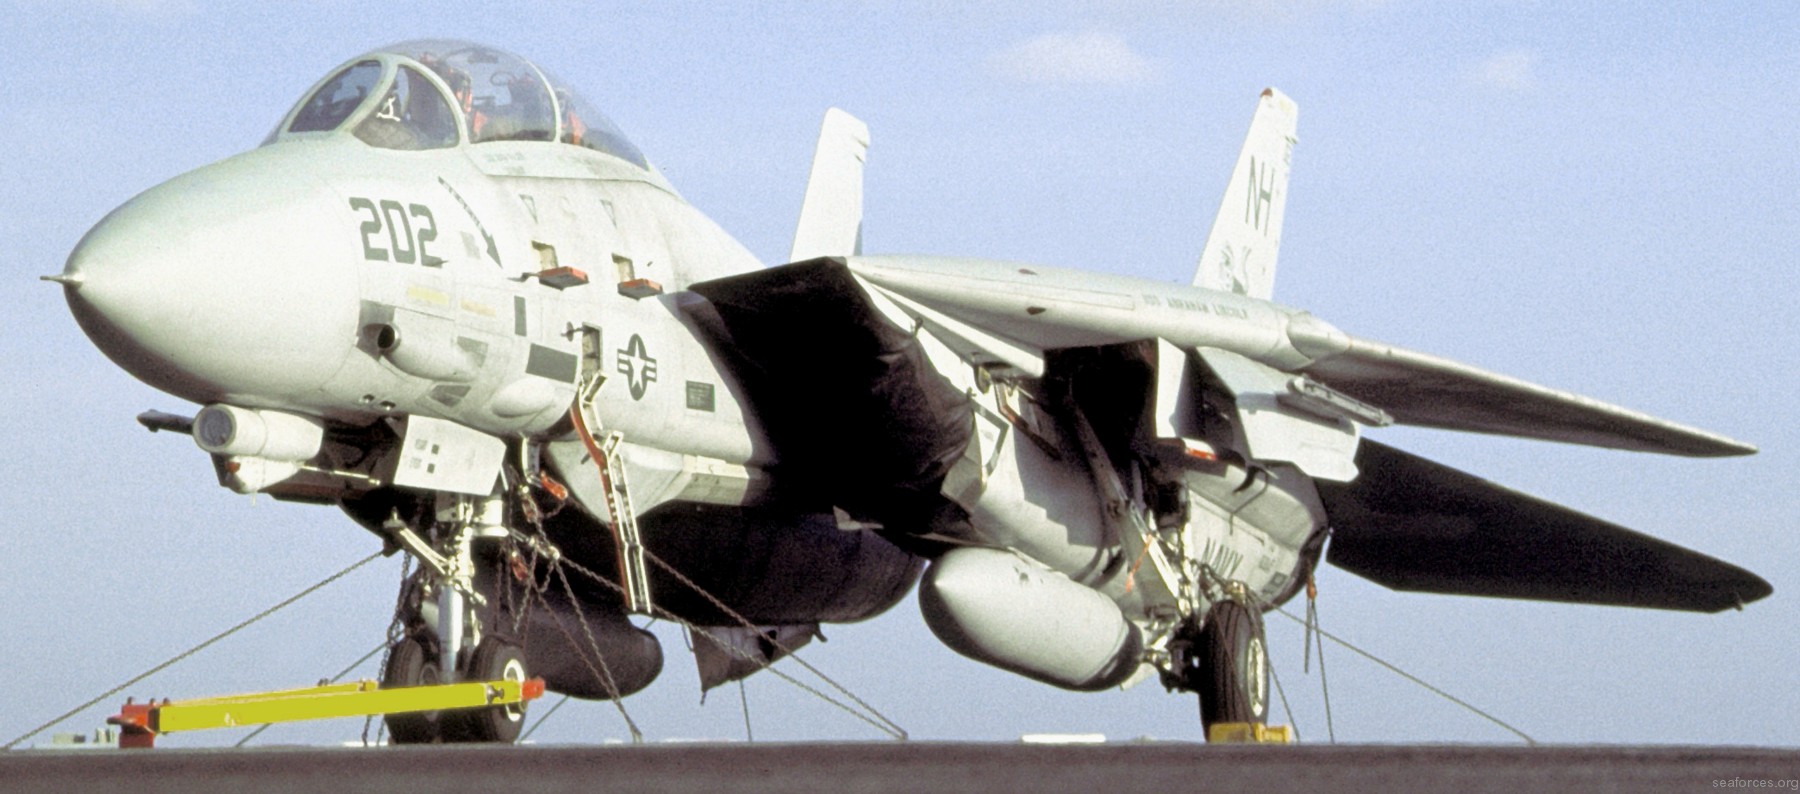 vf-213 black lions fighter squadron us navy f-14a tomcat carrier air wing cvw-11 uss abraham lincoln cvn-72 66